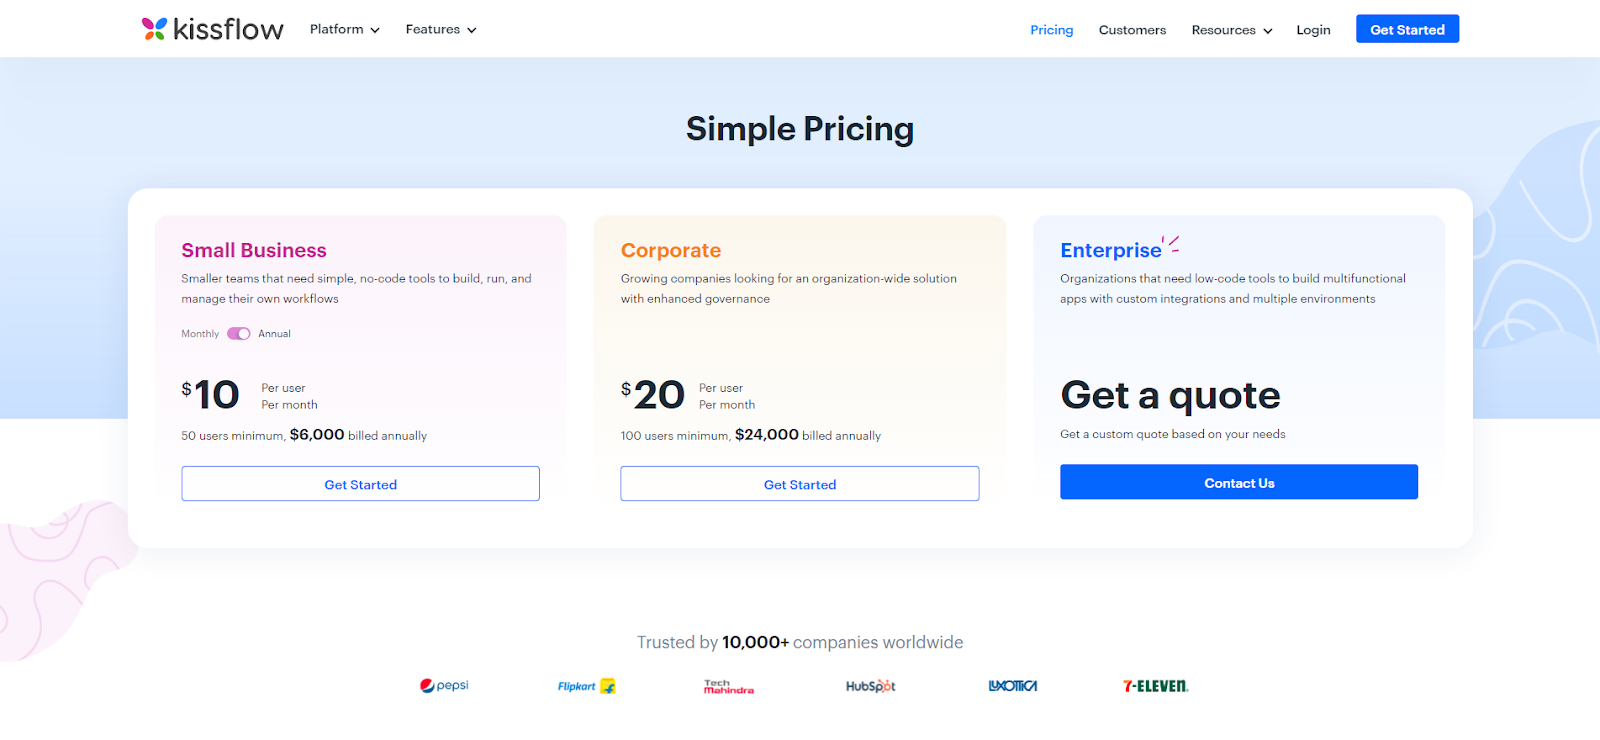 Top 19 Automation Software Price Plans Softlist.io